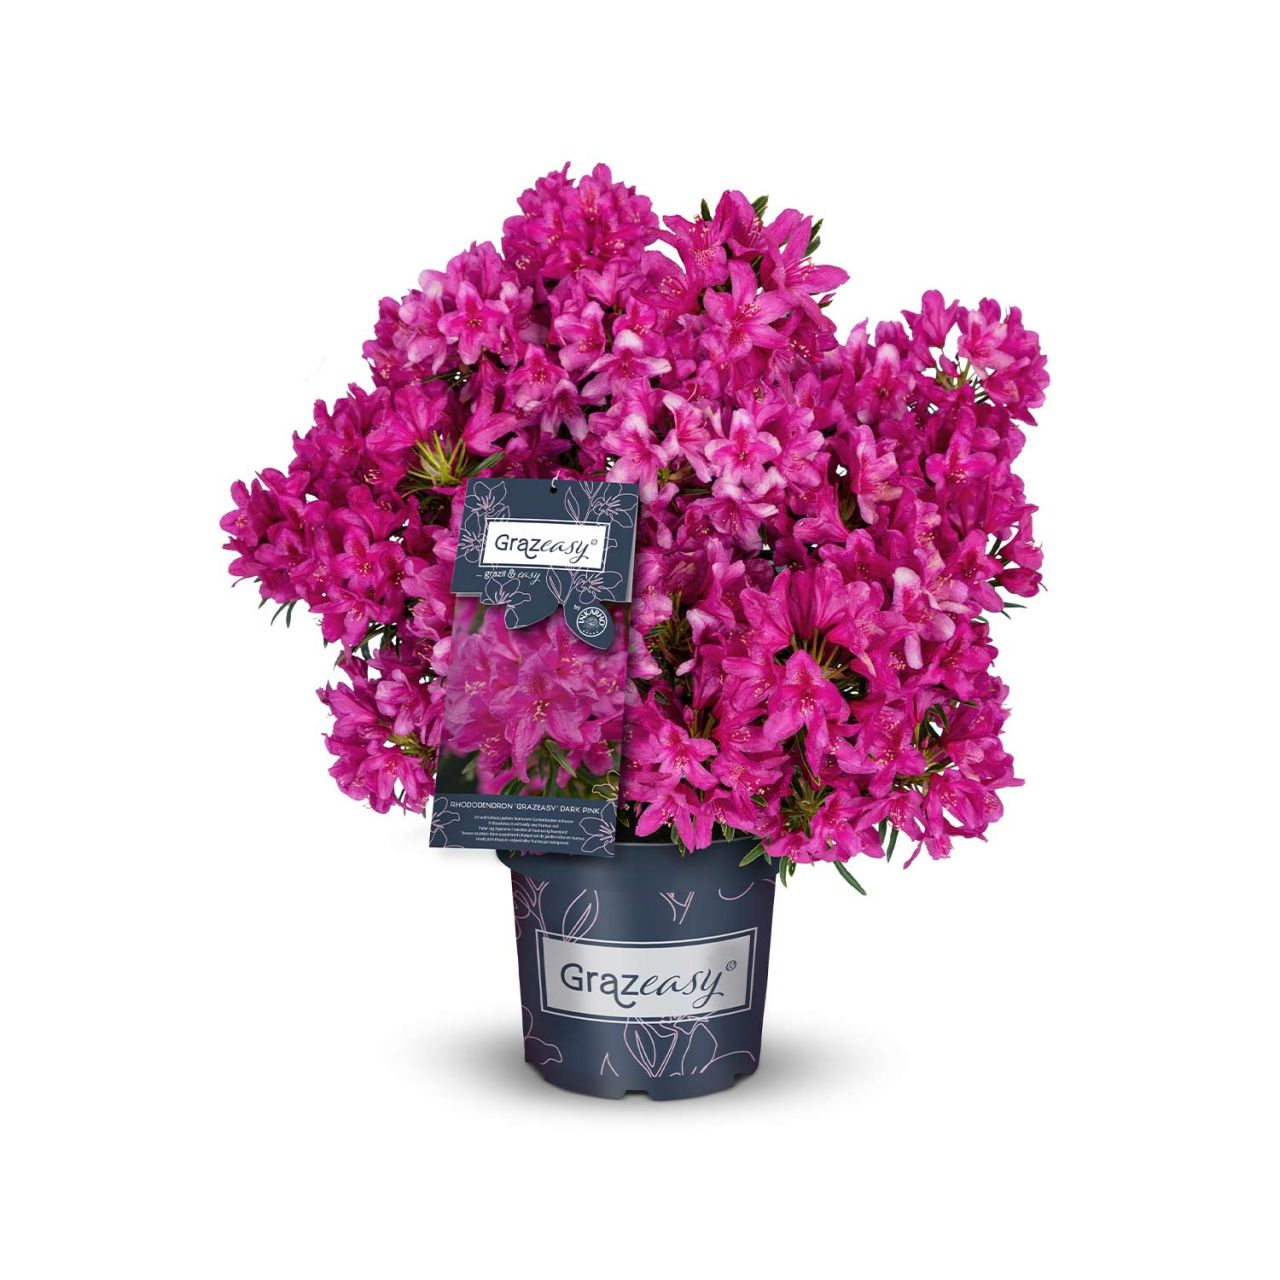 Kategorie <b>Rhododendron </b> - Rhododendron 'Grazeasy® Dark Pink®' - Rhododendron 'Grazeasy® Dark Pink'